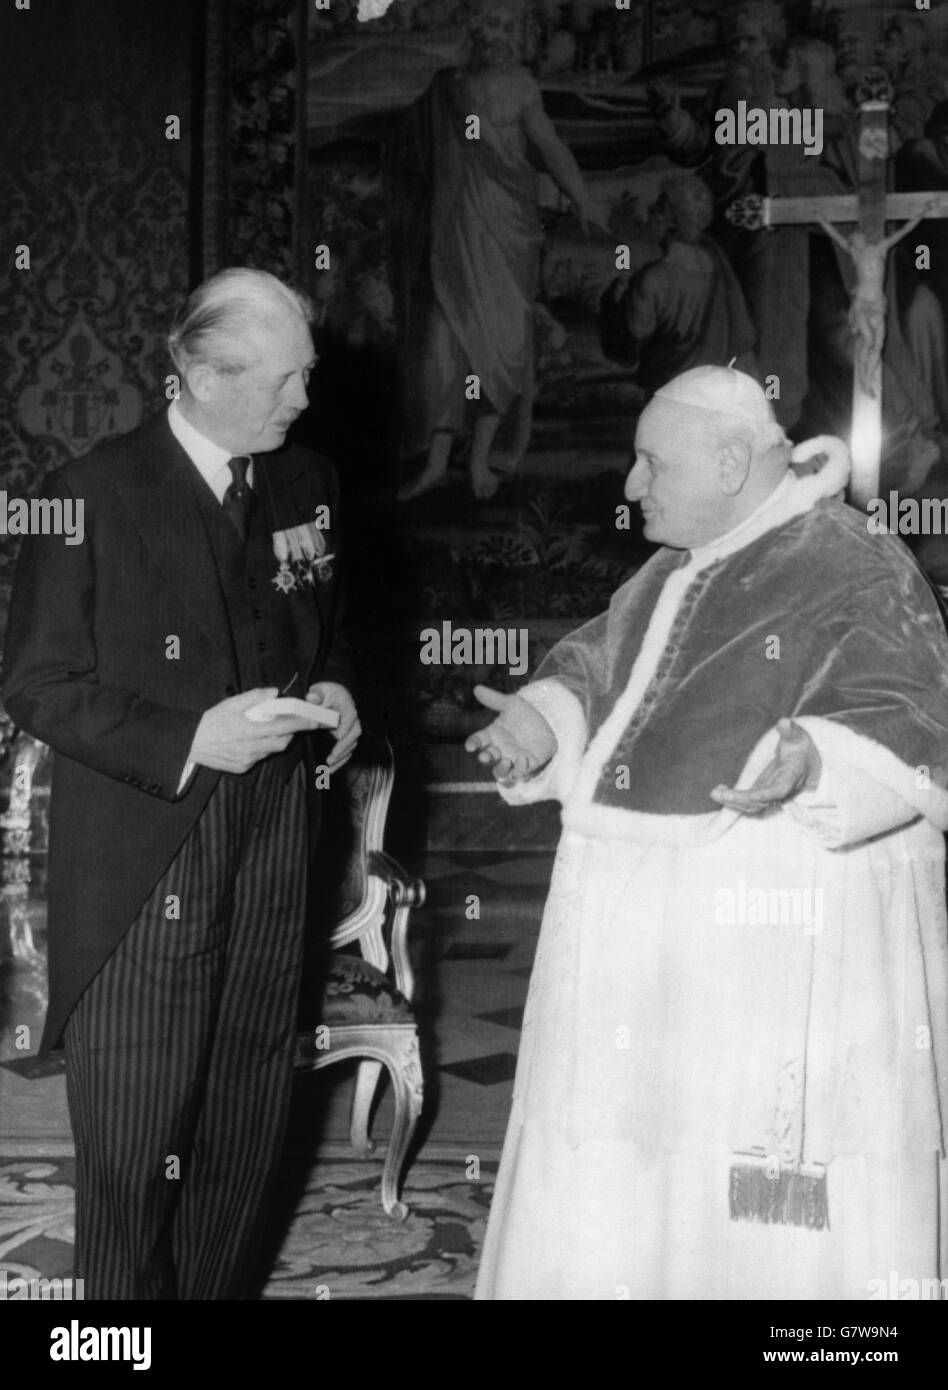 Wearing medals, British Prime Minister Harold MacMillan pictured when he was warmly welcomed by Pope John at Vatican City. The Premier, who conferred with the Pope in French, was accompanied by Lord Home, Foreign Secretary, and Sir Thomas Scarlett, the British Minister to the Holy See, The Premier is currently in Rome for talks with the Italian Government. Stock Photo